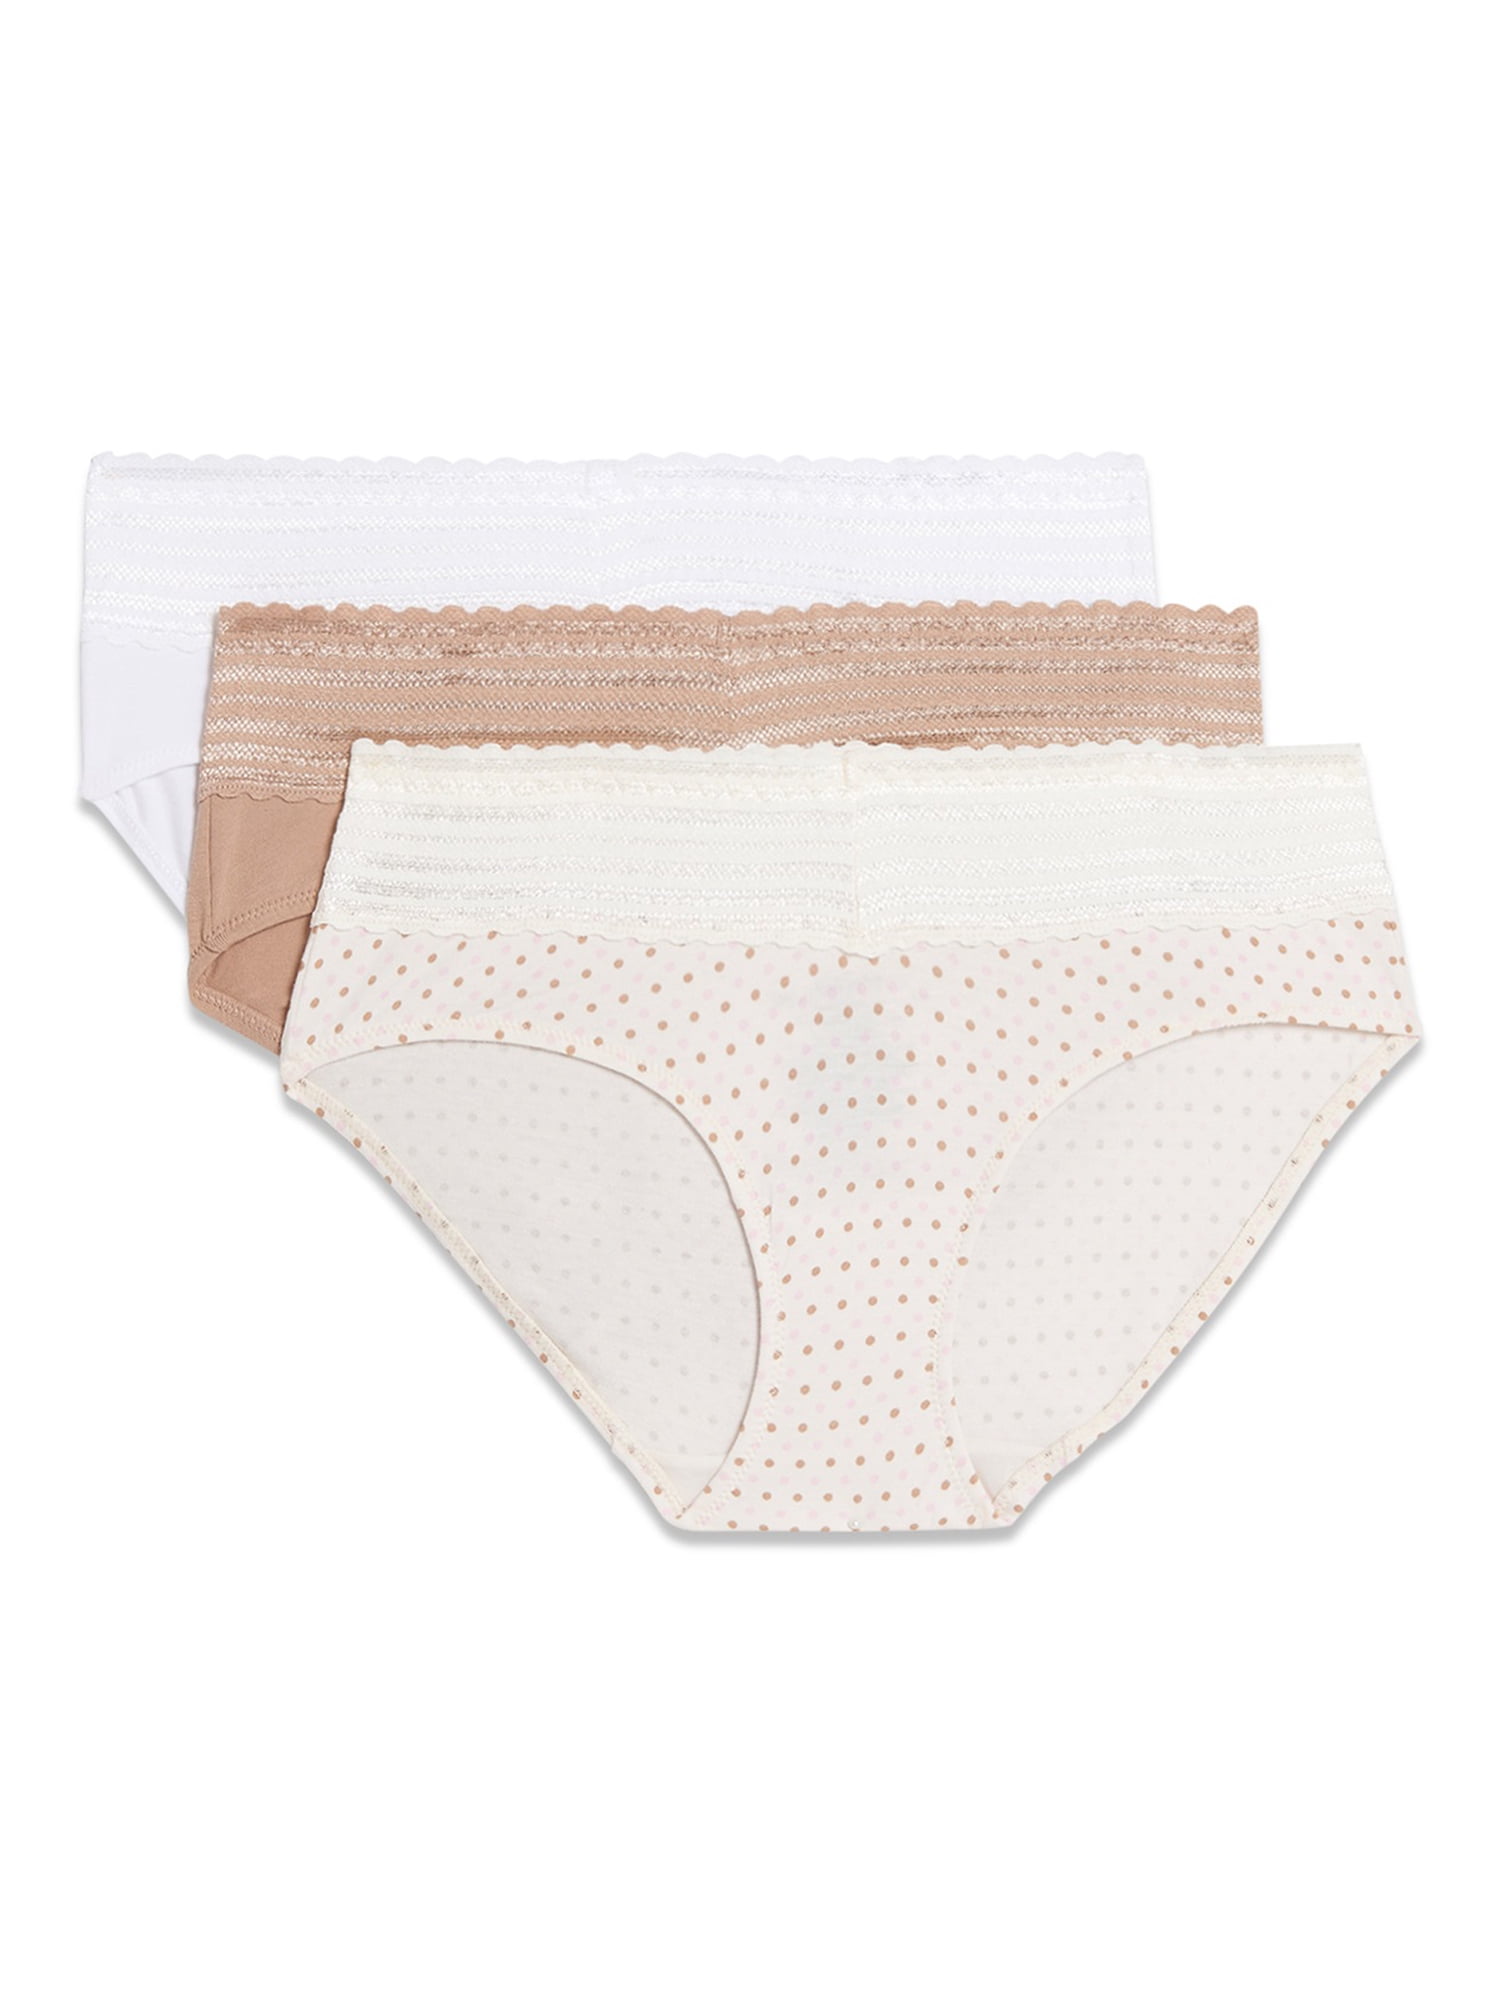 Warners® Blissful Benefits Dig-Free Comfort Waist with Lace Cotton Hipster  3-Pack RU2263W 